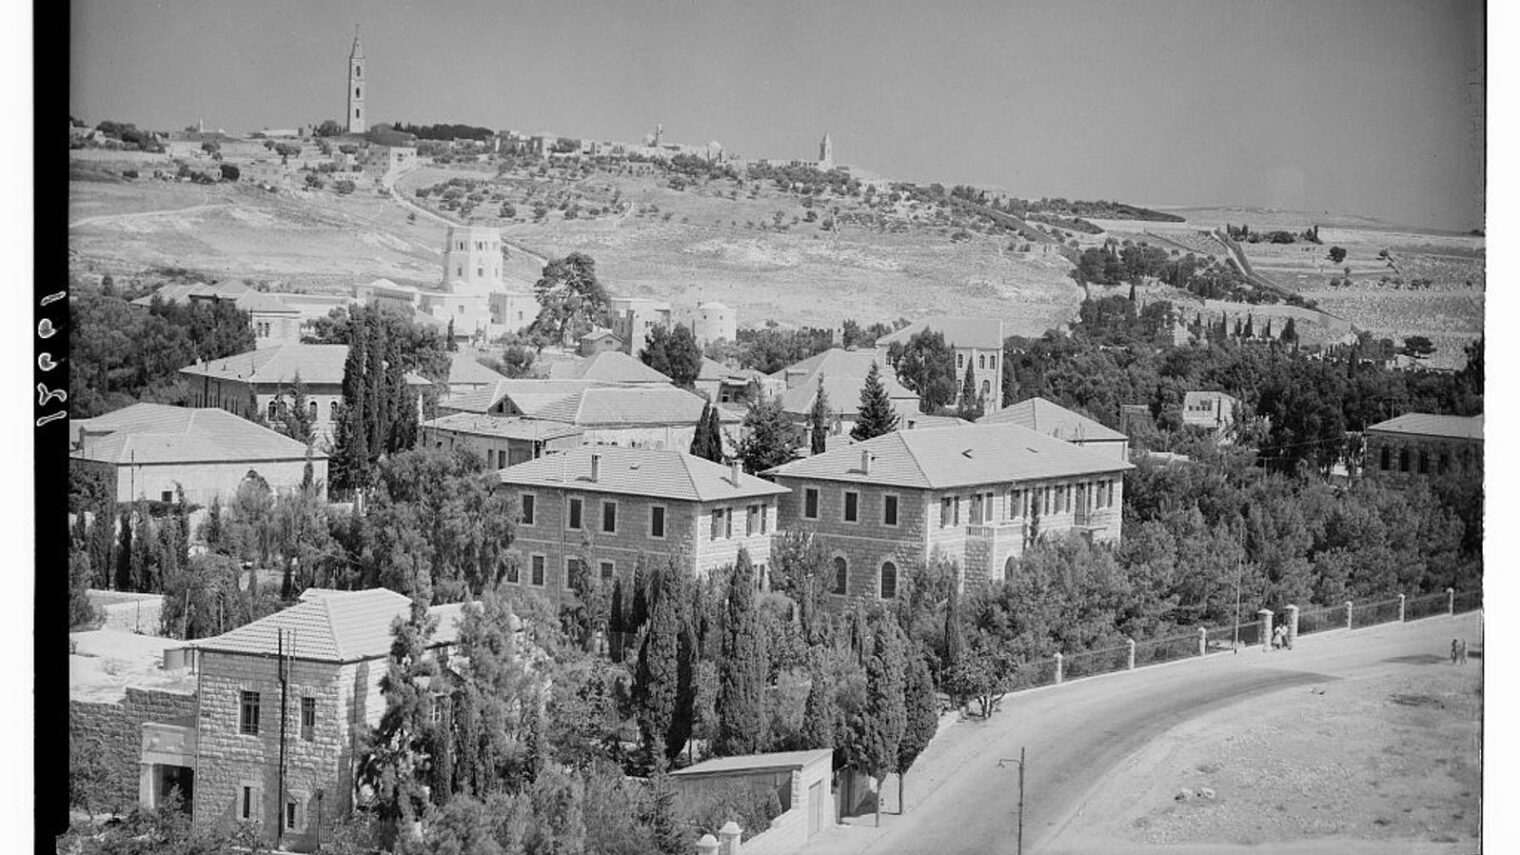 American School of Oriental Research, seen from St. Georgeâ€™s Cathedral Tower in the 1940s. Courtesy of G. Eric and Edith Matson Photograph Collection, Library of Congress Prints and Photographs Division